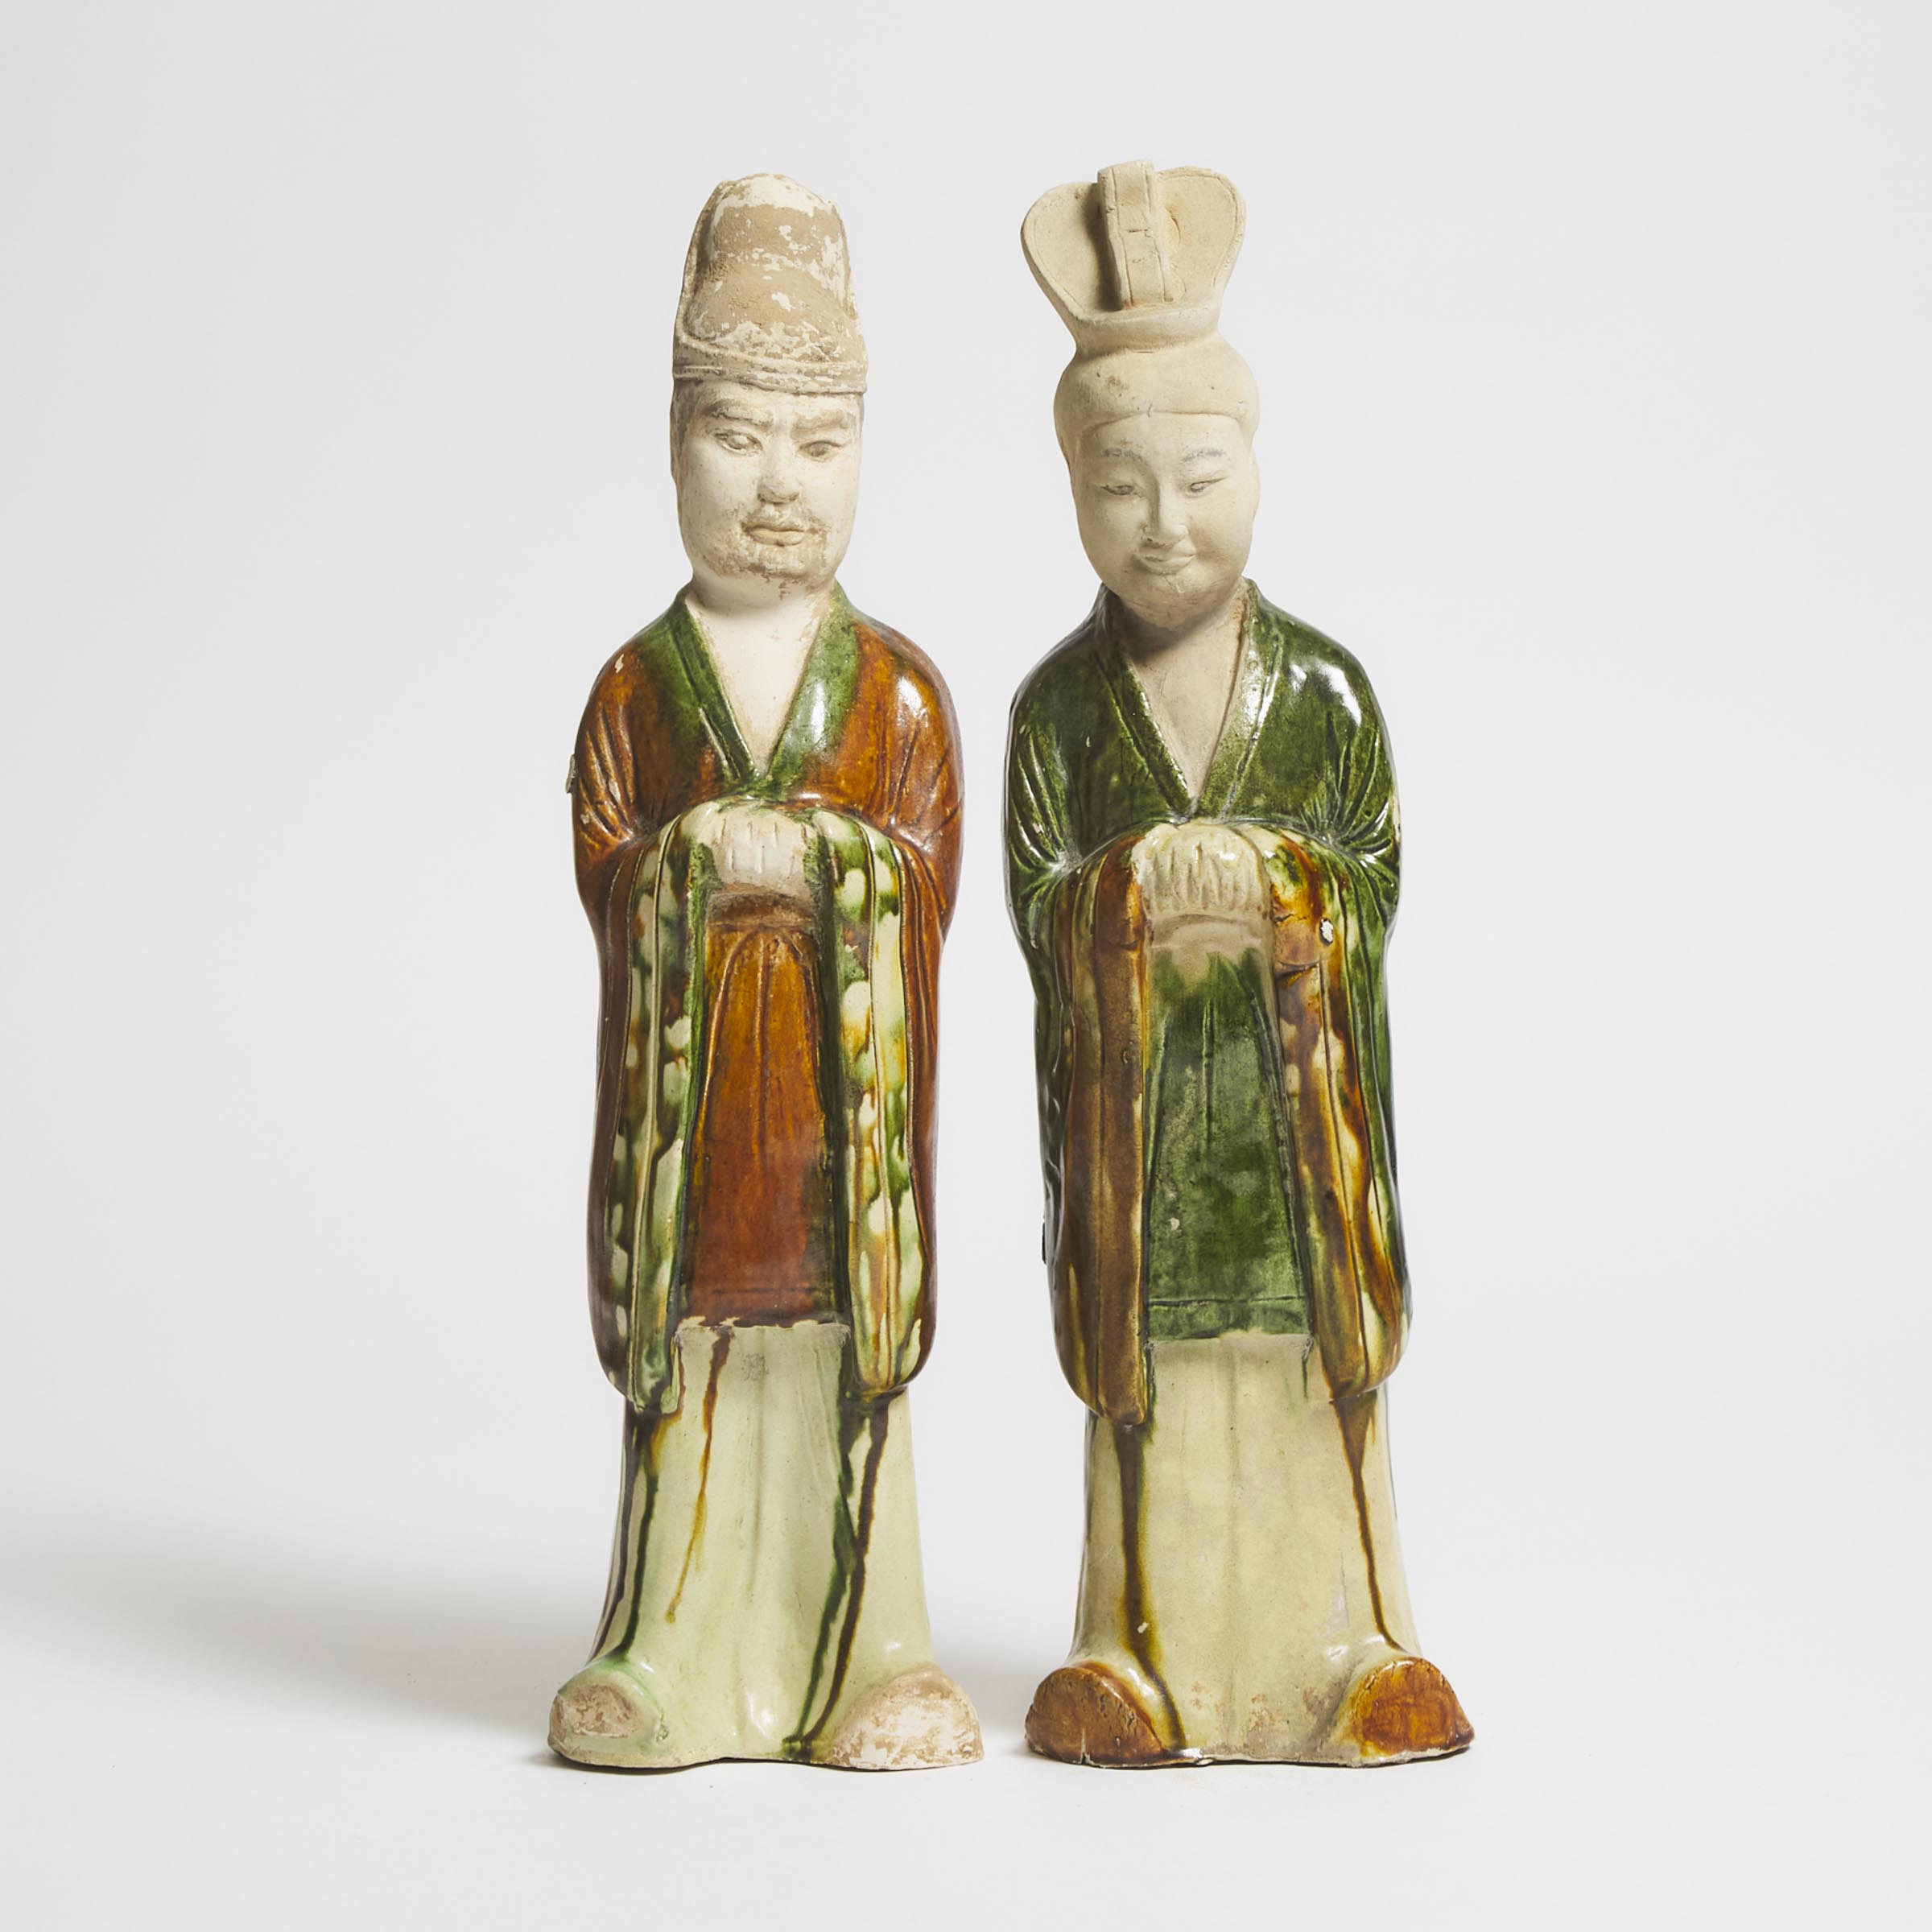 A Pair of Sancai-Glazed Pottery Figures of Attendants, Tang Dynasty (AD 618-907)